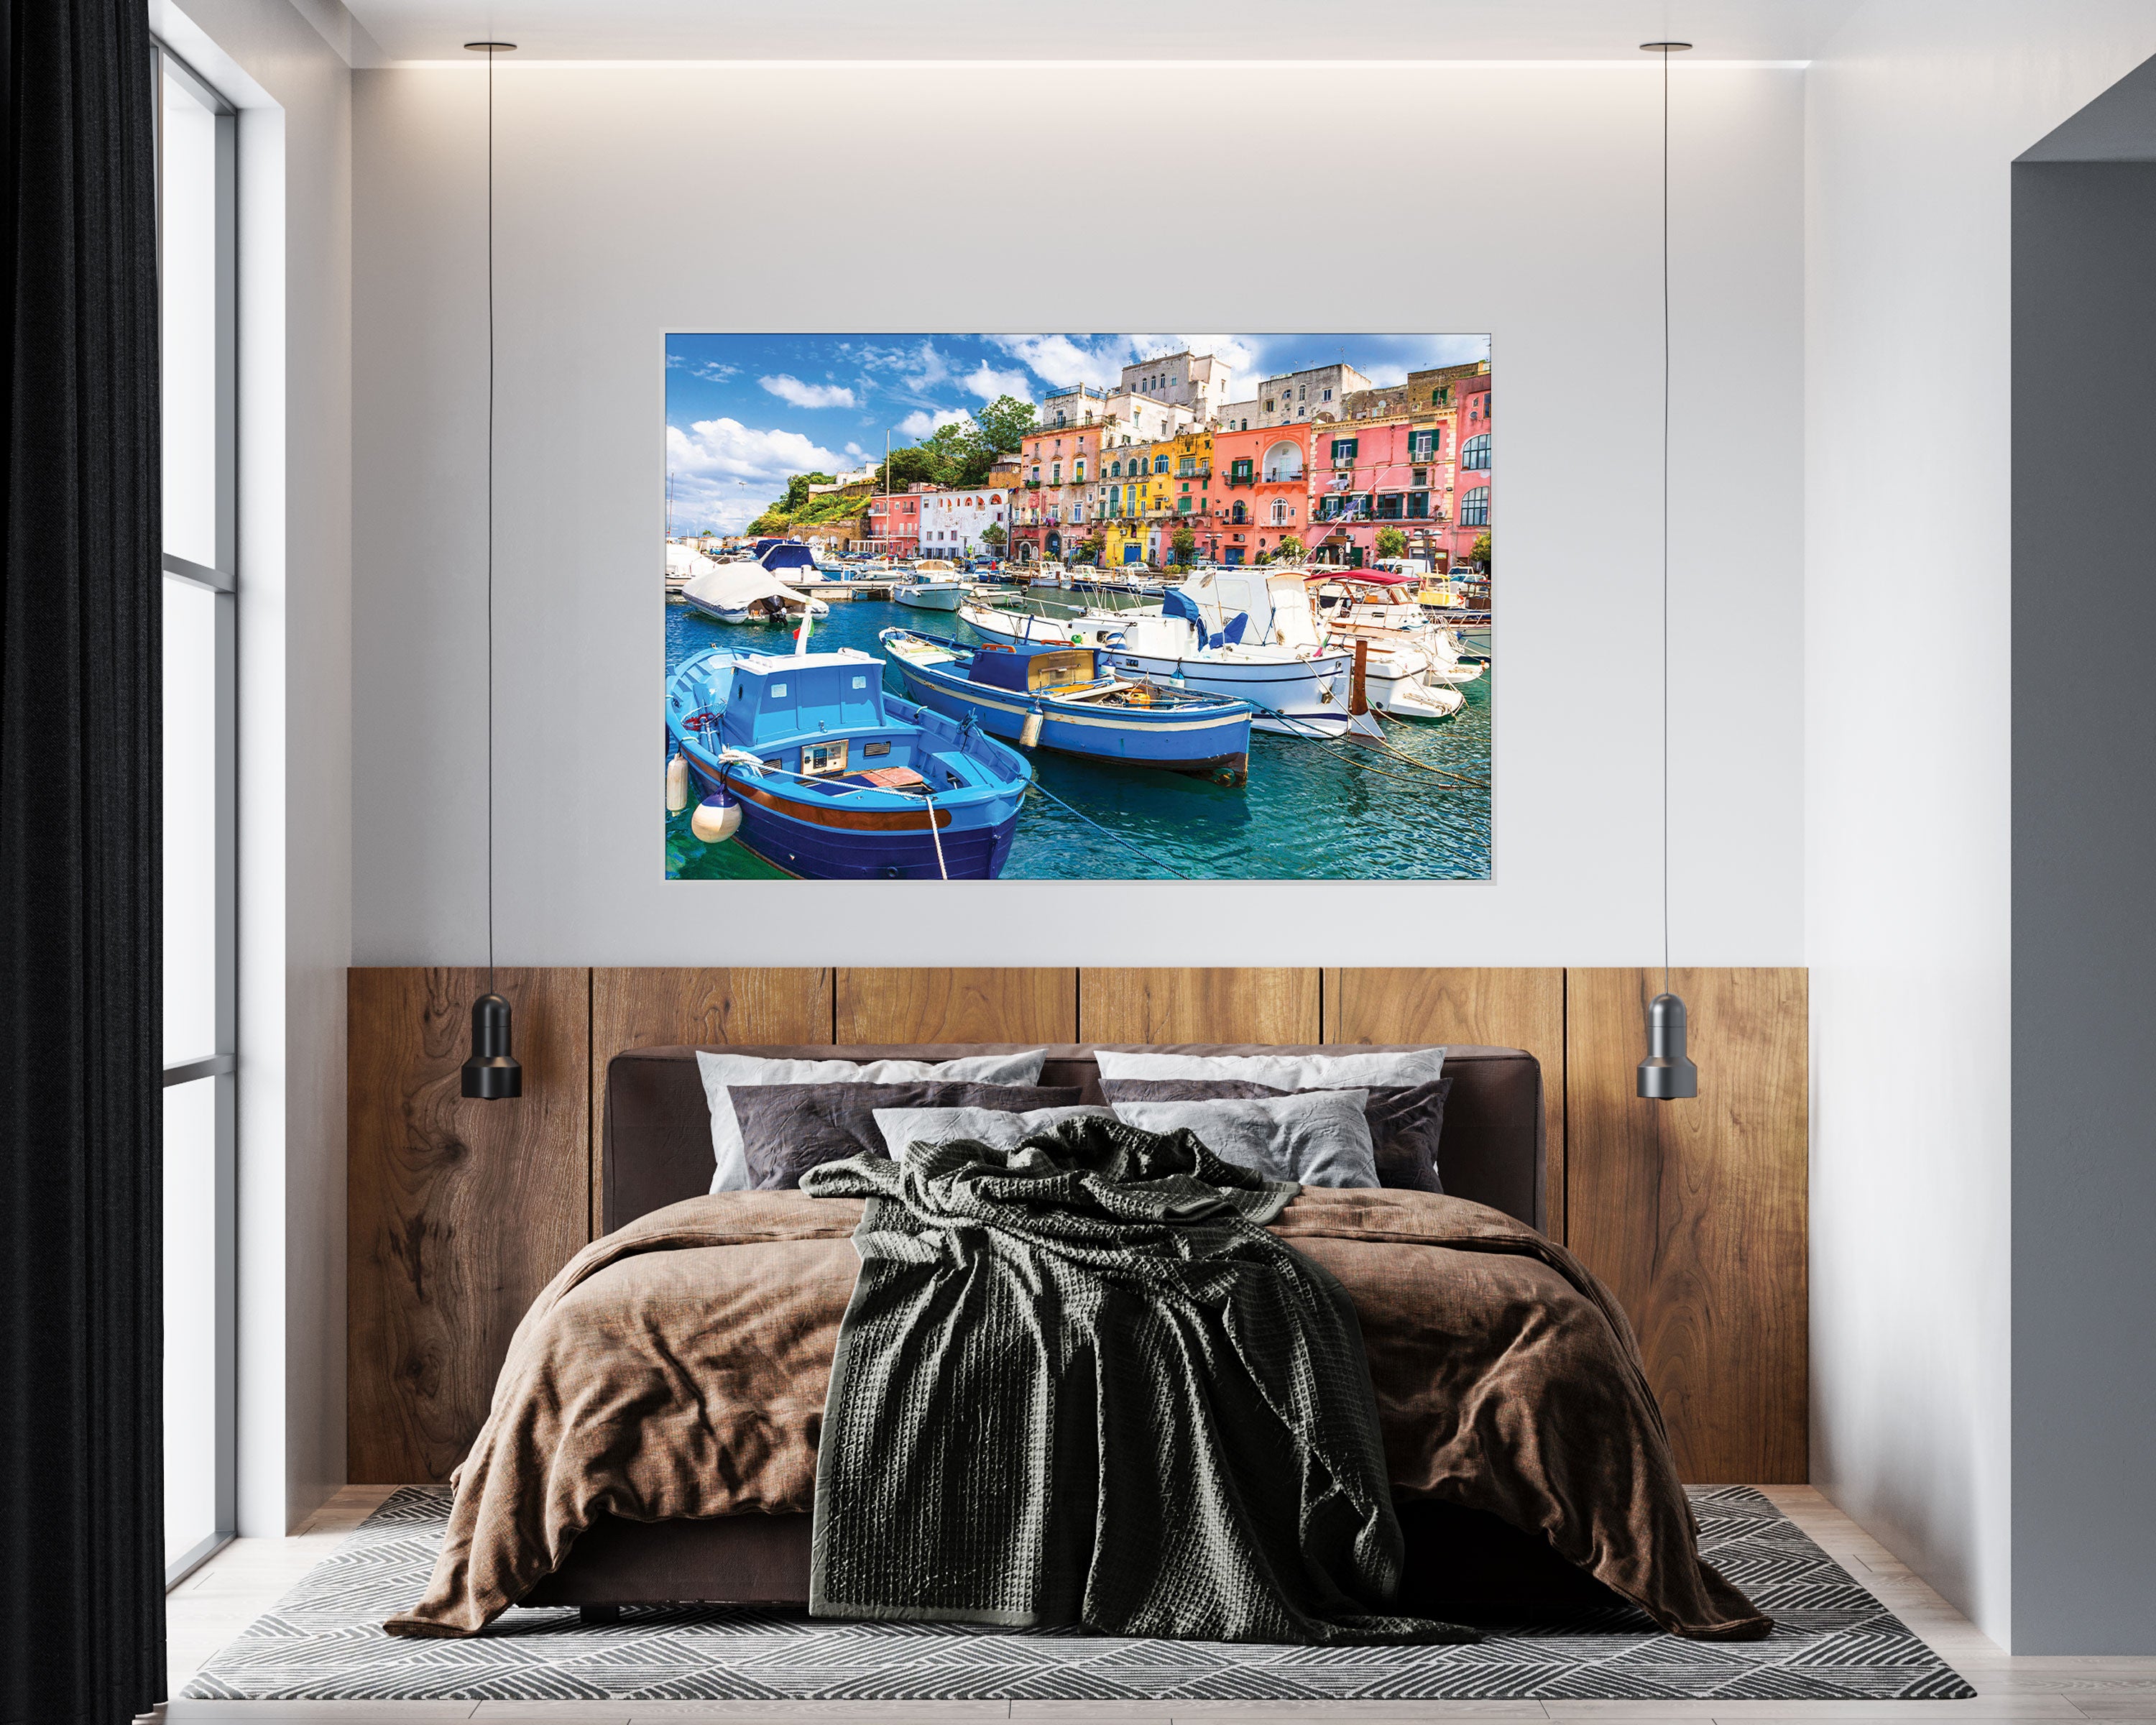 GM018F Grace & Gardenia Venice Canal Premium Peel and Stick Mural 69 inch wide x 46 inch height Blue Pink White